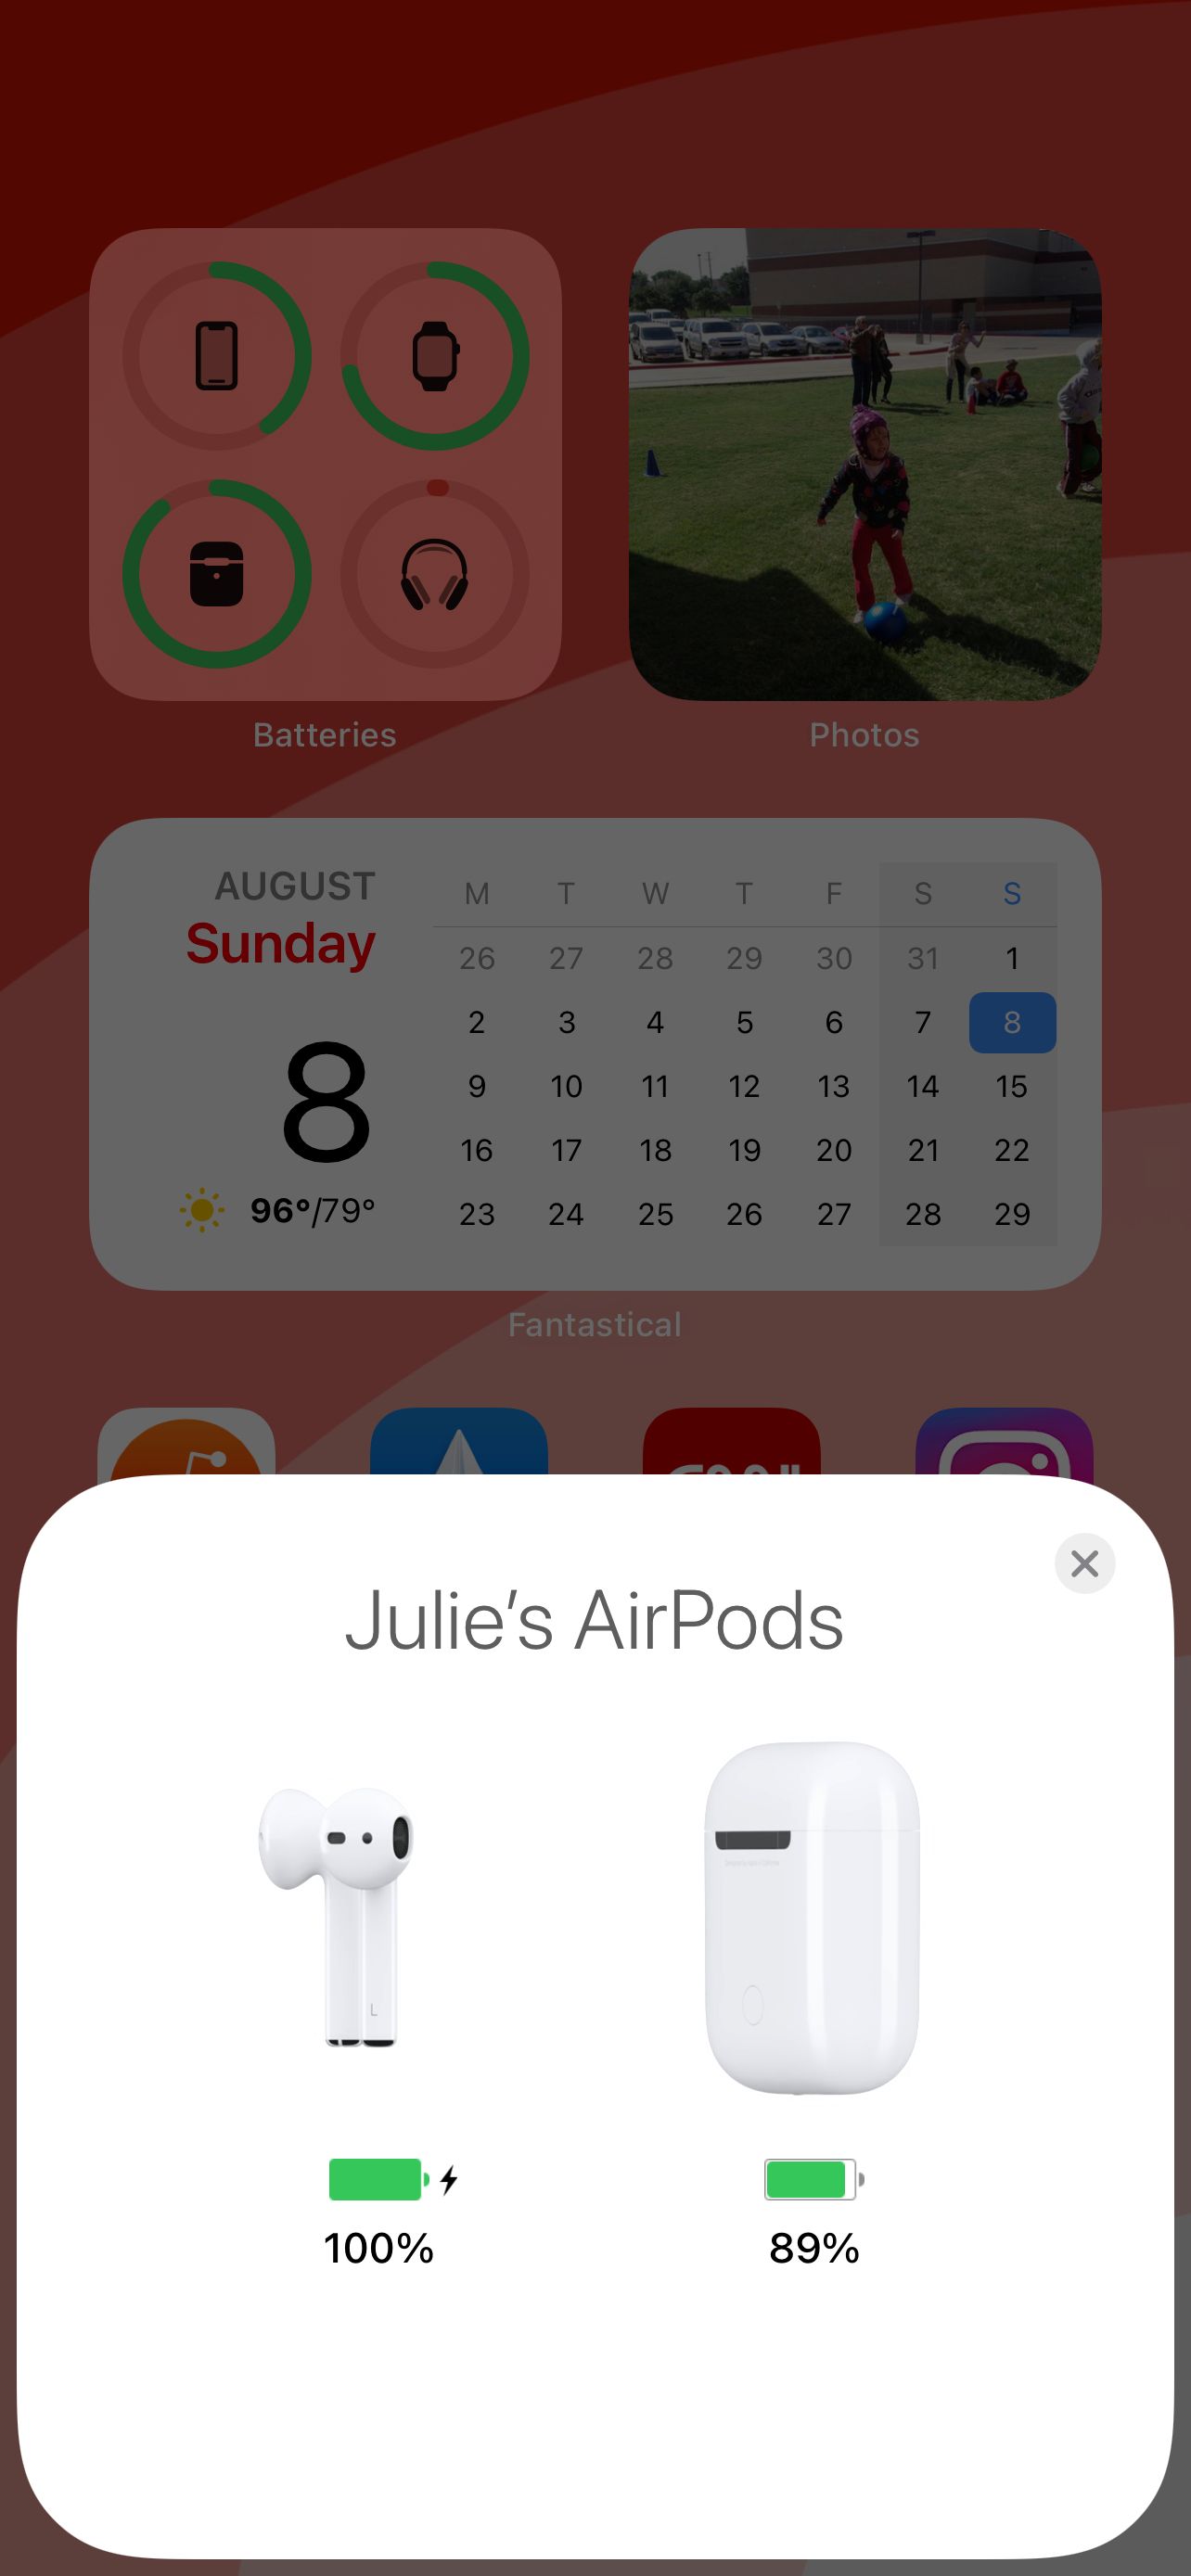 airpods-battery-life